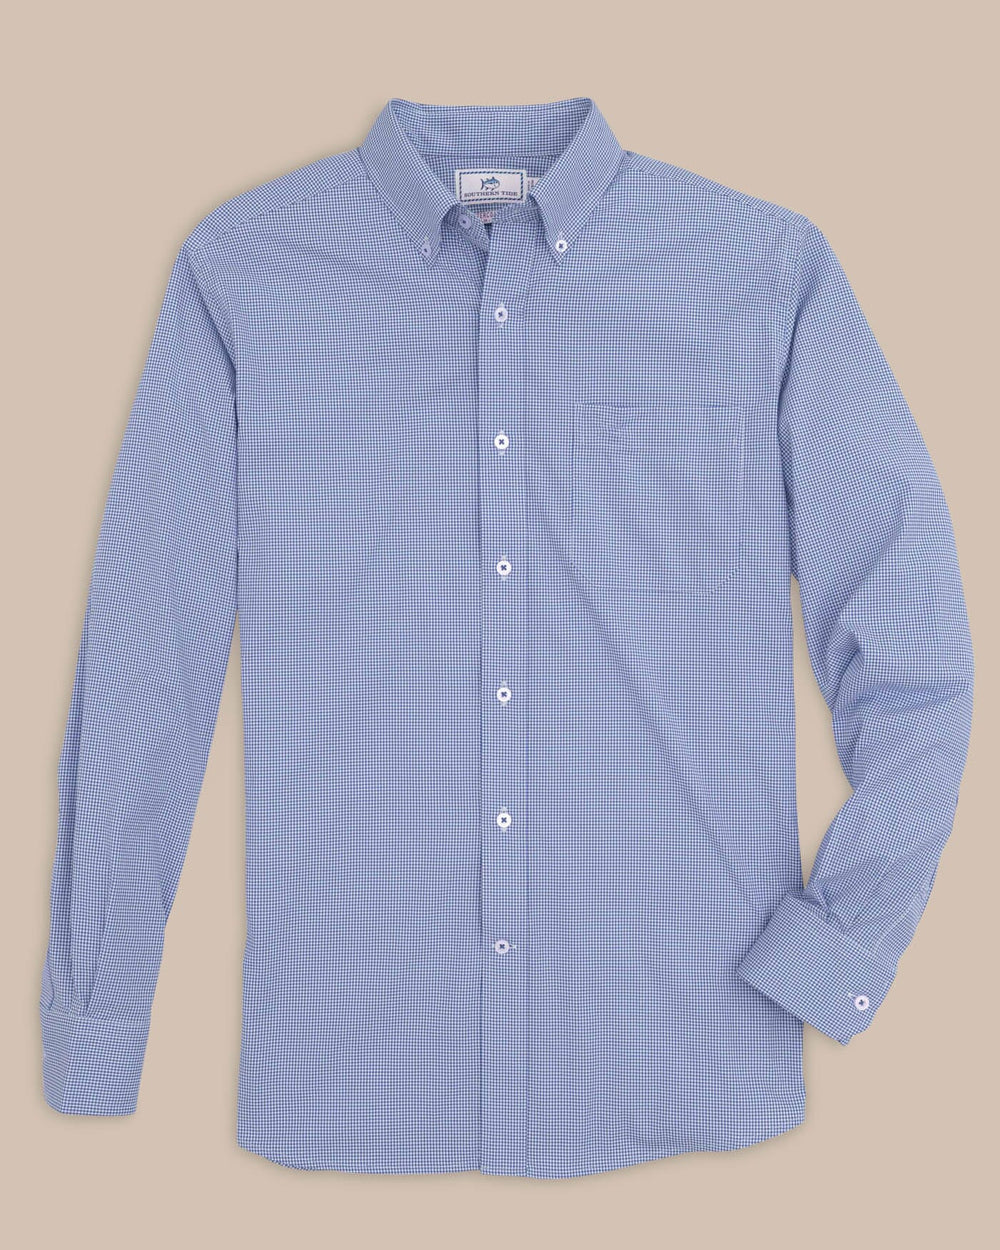 The front view of the Southern Tide Team Colors Gingham Intercoastal Sport Shirt by Southern Tide - University Blue